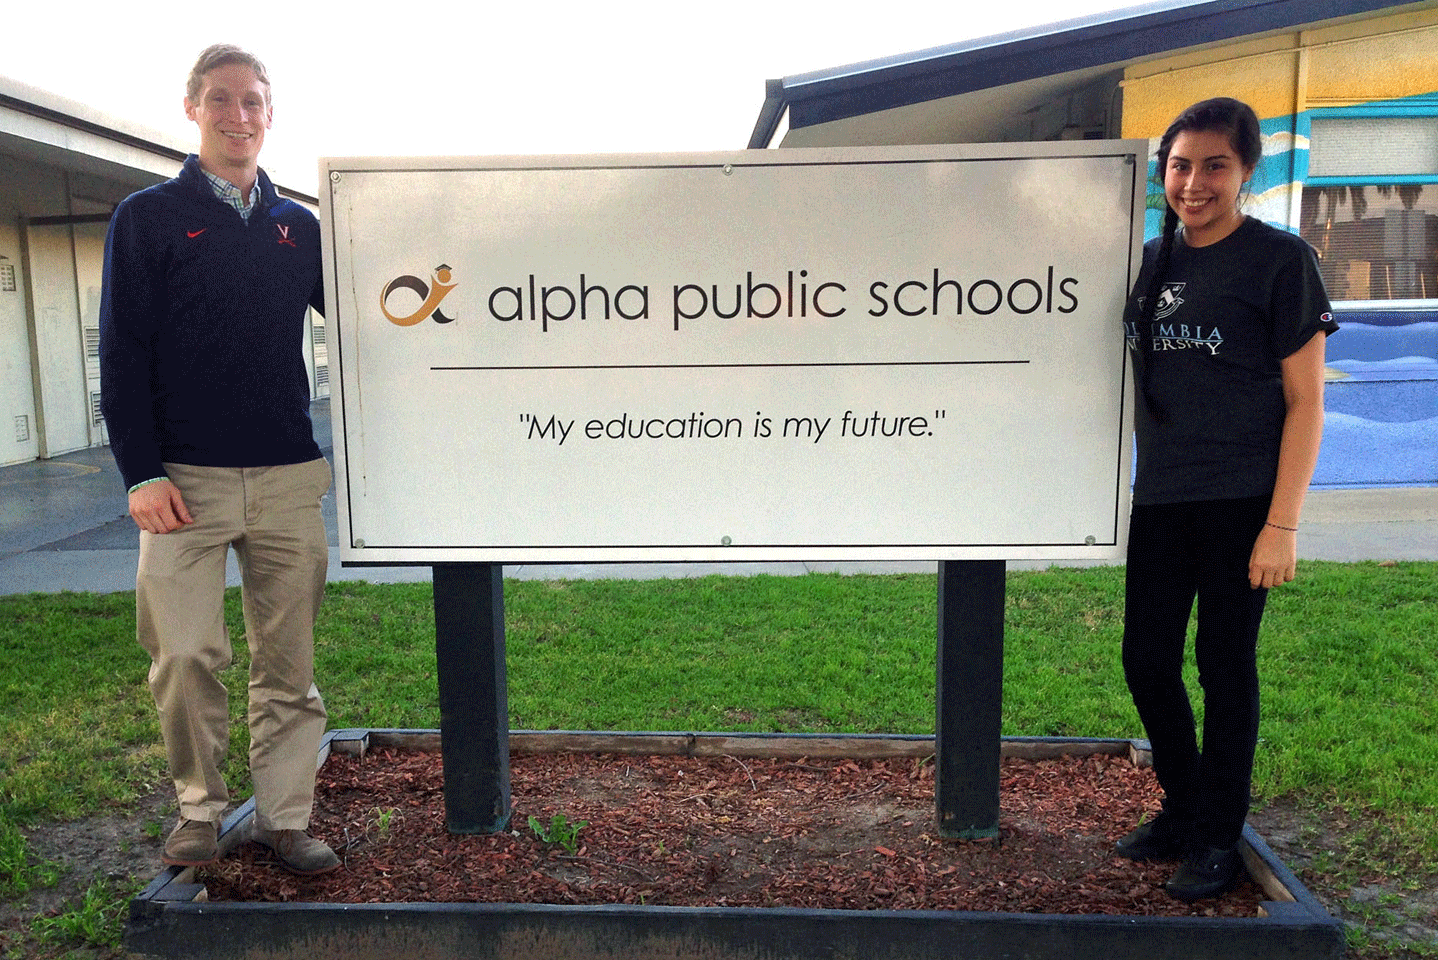 Soon-to-be principal Will Eden, left, and student Ana Wallace, a member of the Alpha: Cindy Avitia High School design team, stand outside one of two Alpha middle schools in East San Jose, Calif. (Photo: Lillian Mongeau)